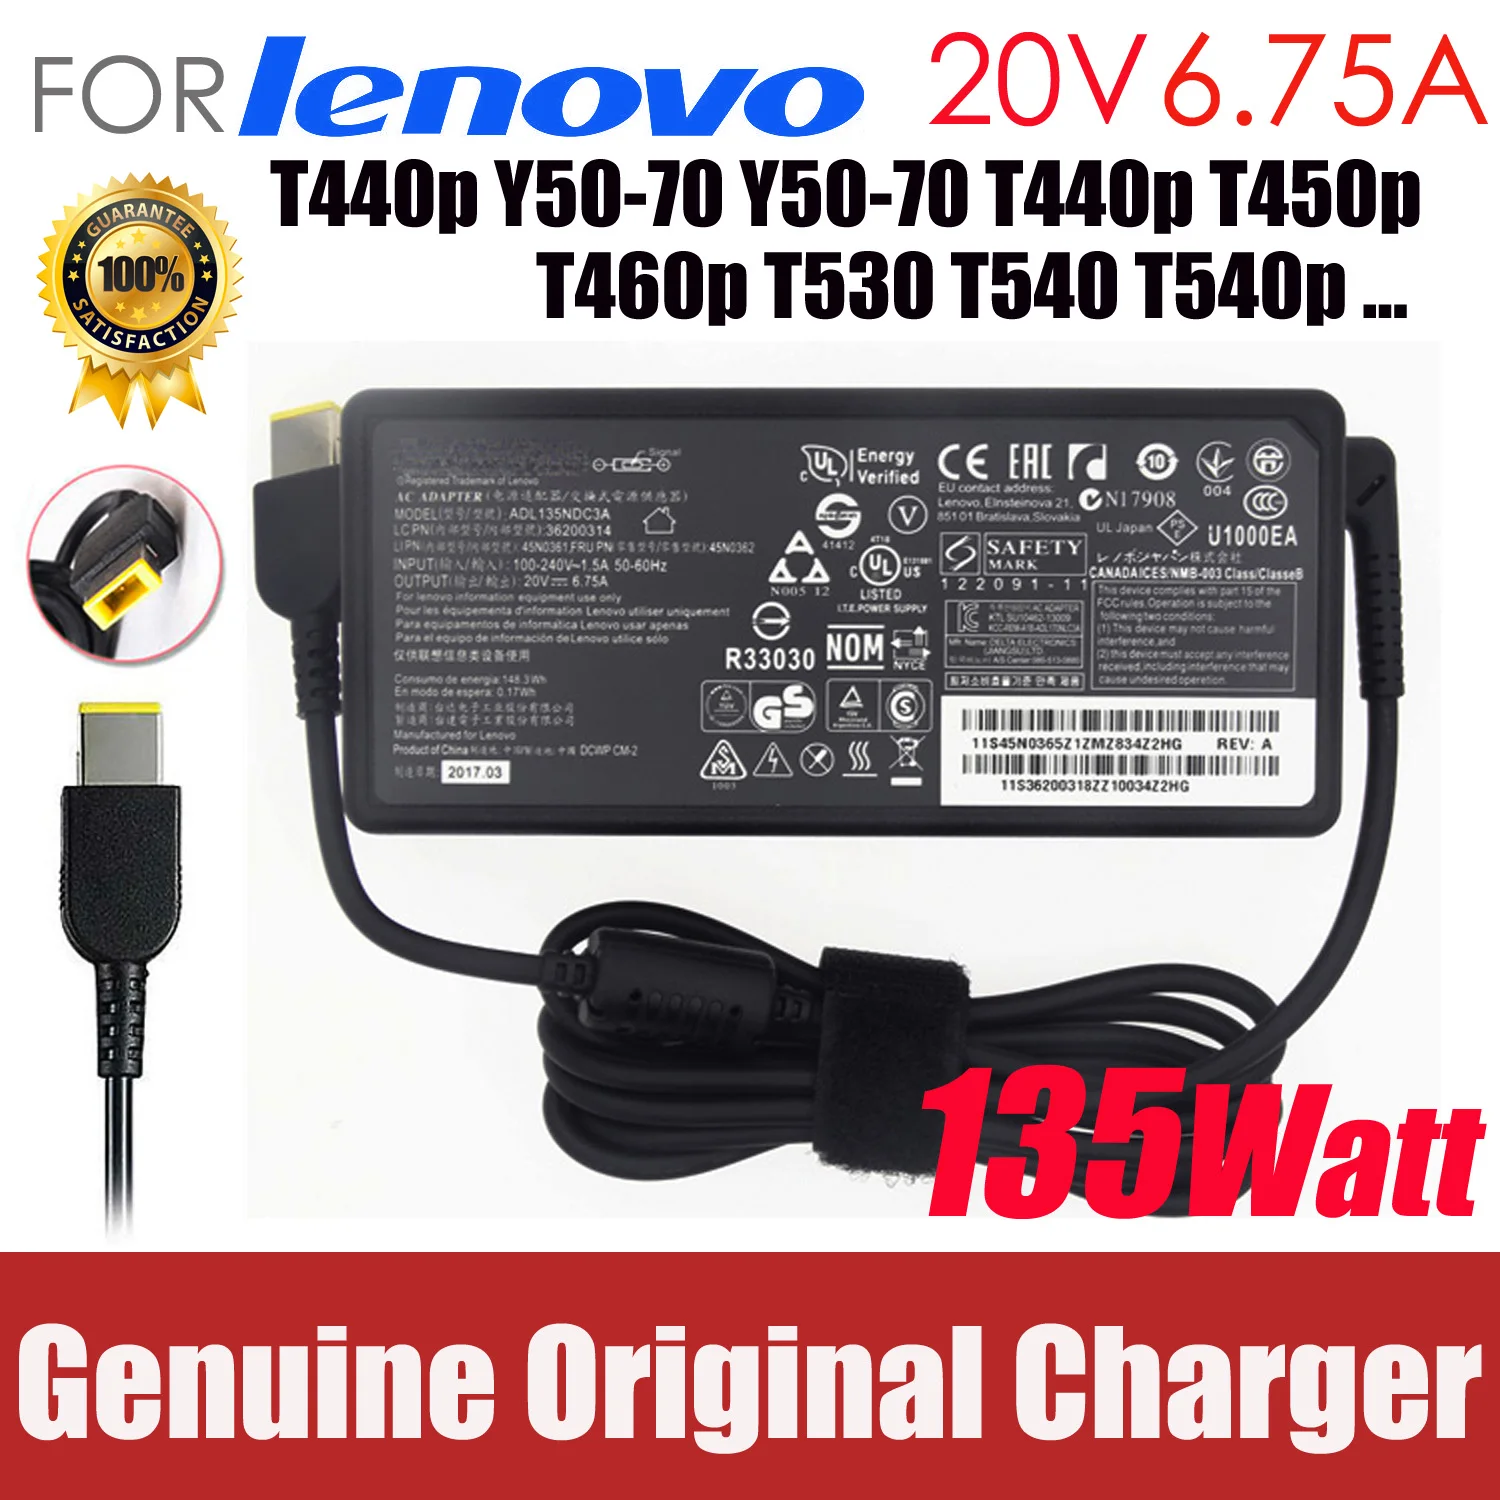 

Original 20V 6.75A 135W For Lenovo Thinkpad T440p Y50-70 Y50-70 T440p T450p T460p T530 T540 T540p Laptop AC adapter Charger